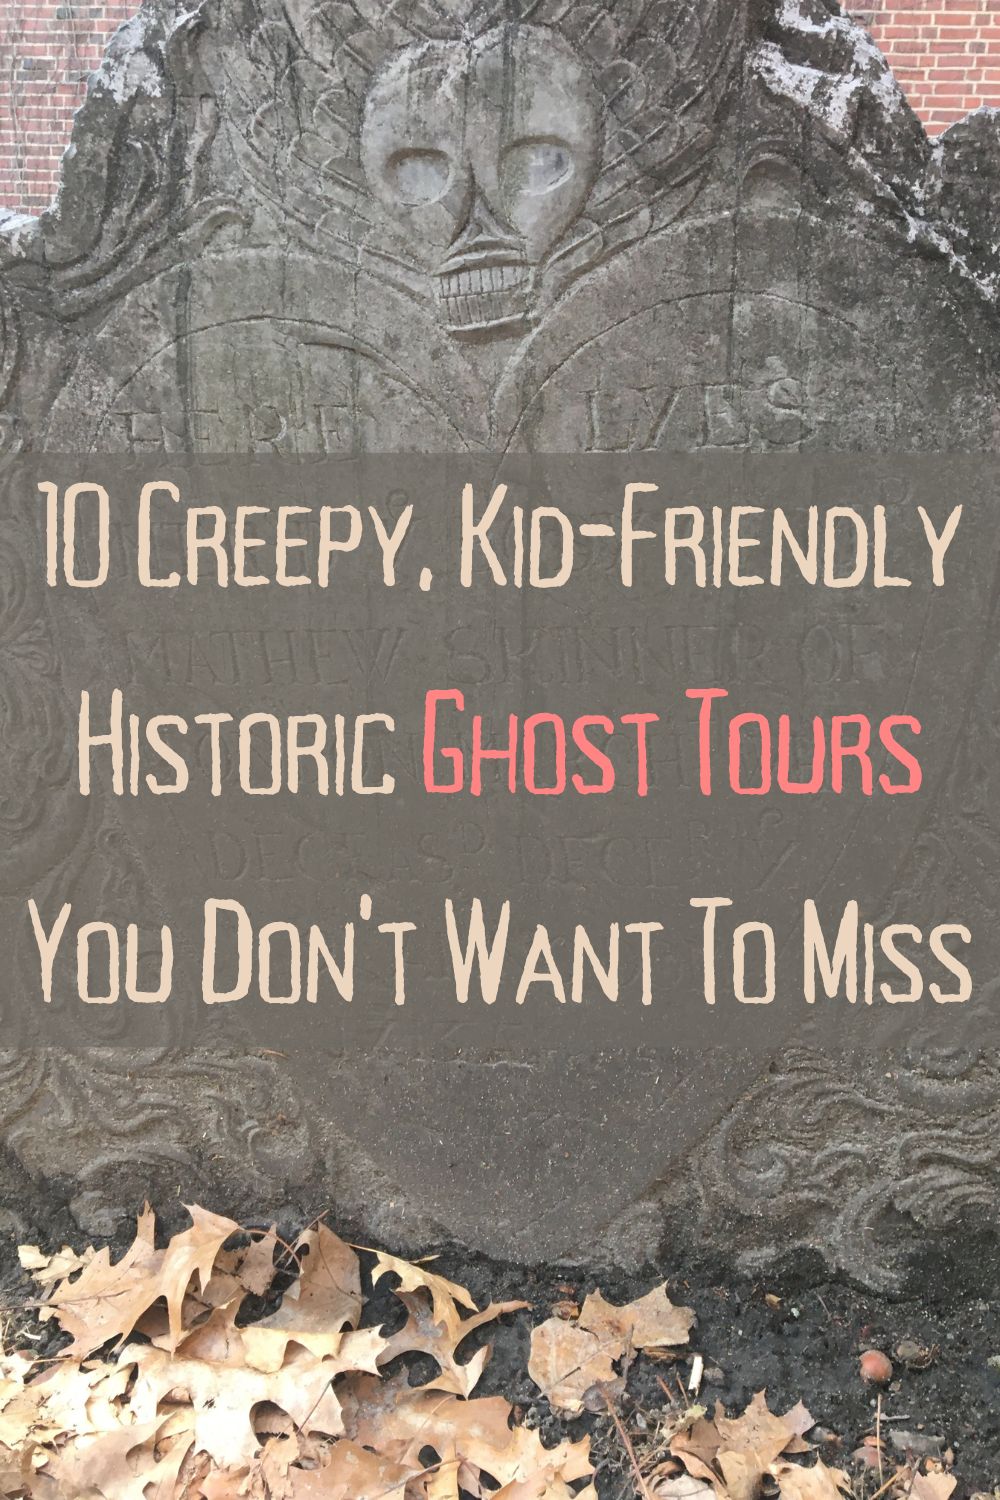 10 kid-friendly historic ghost tours in popular 10 u.s. cities, including new orleans, savannah and boston. #ghost #tours #historic #kid-friendly #neworelans #savannah.